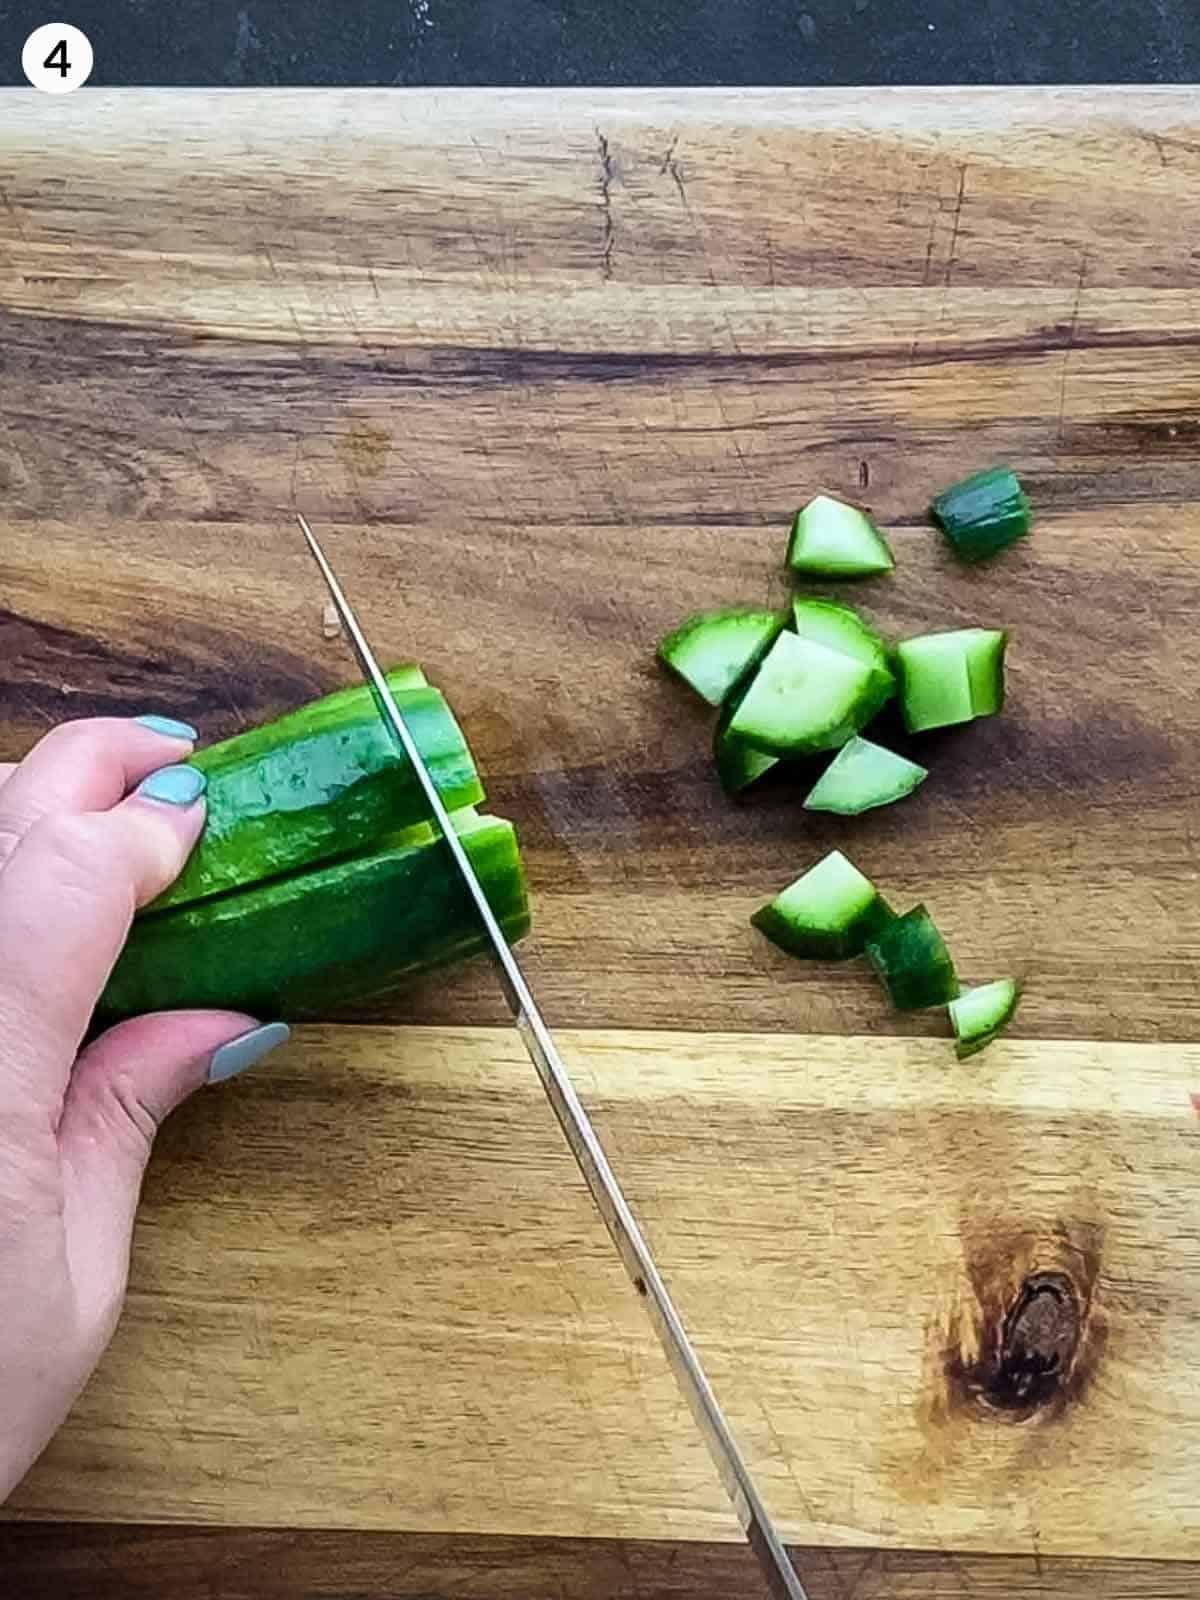 hands using knife to cut cucumber pieces on wooden chopping board